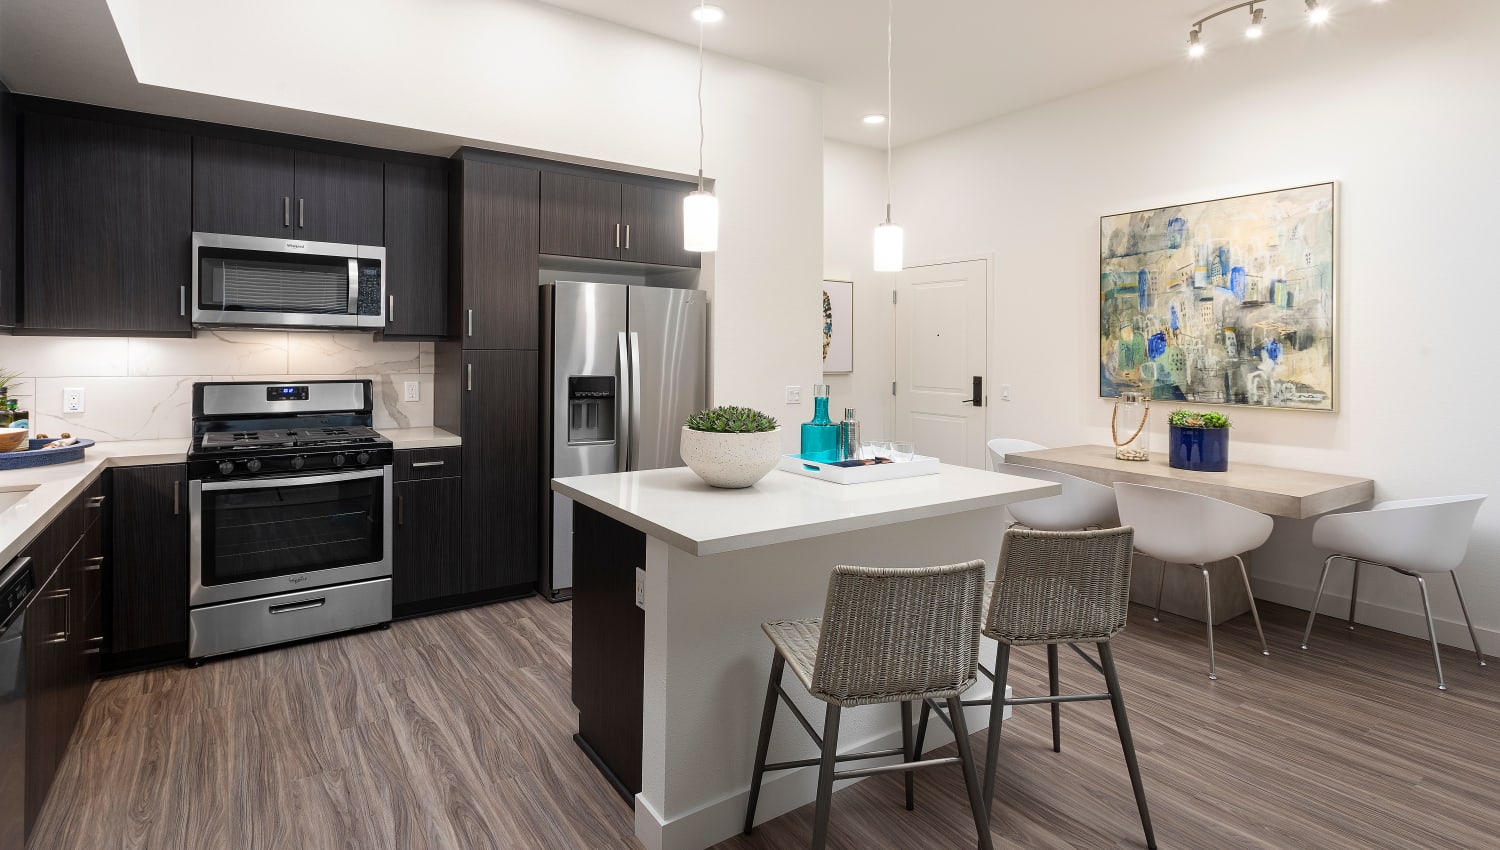 Model kitchen leading into dining space at The Residences at Escaya in Chula Vista, California